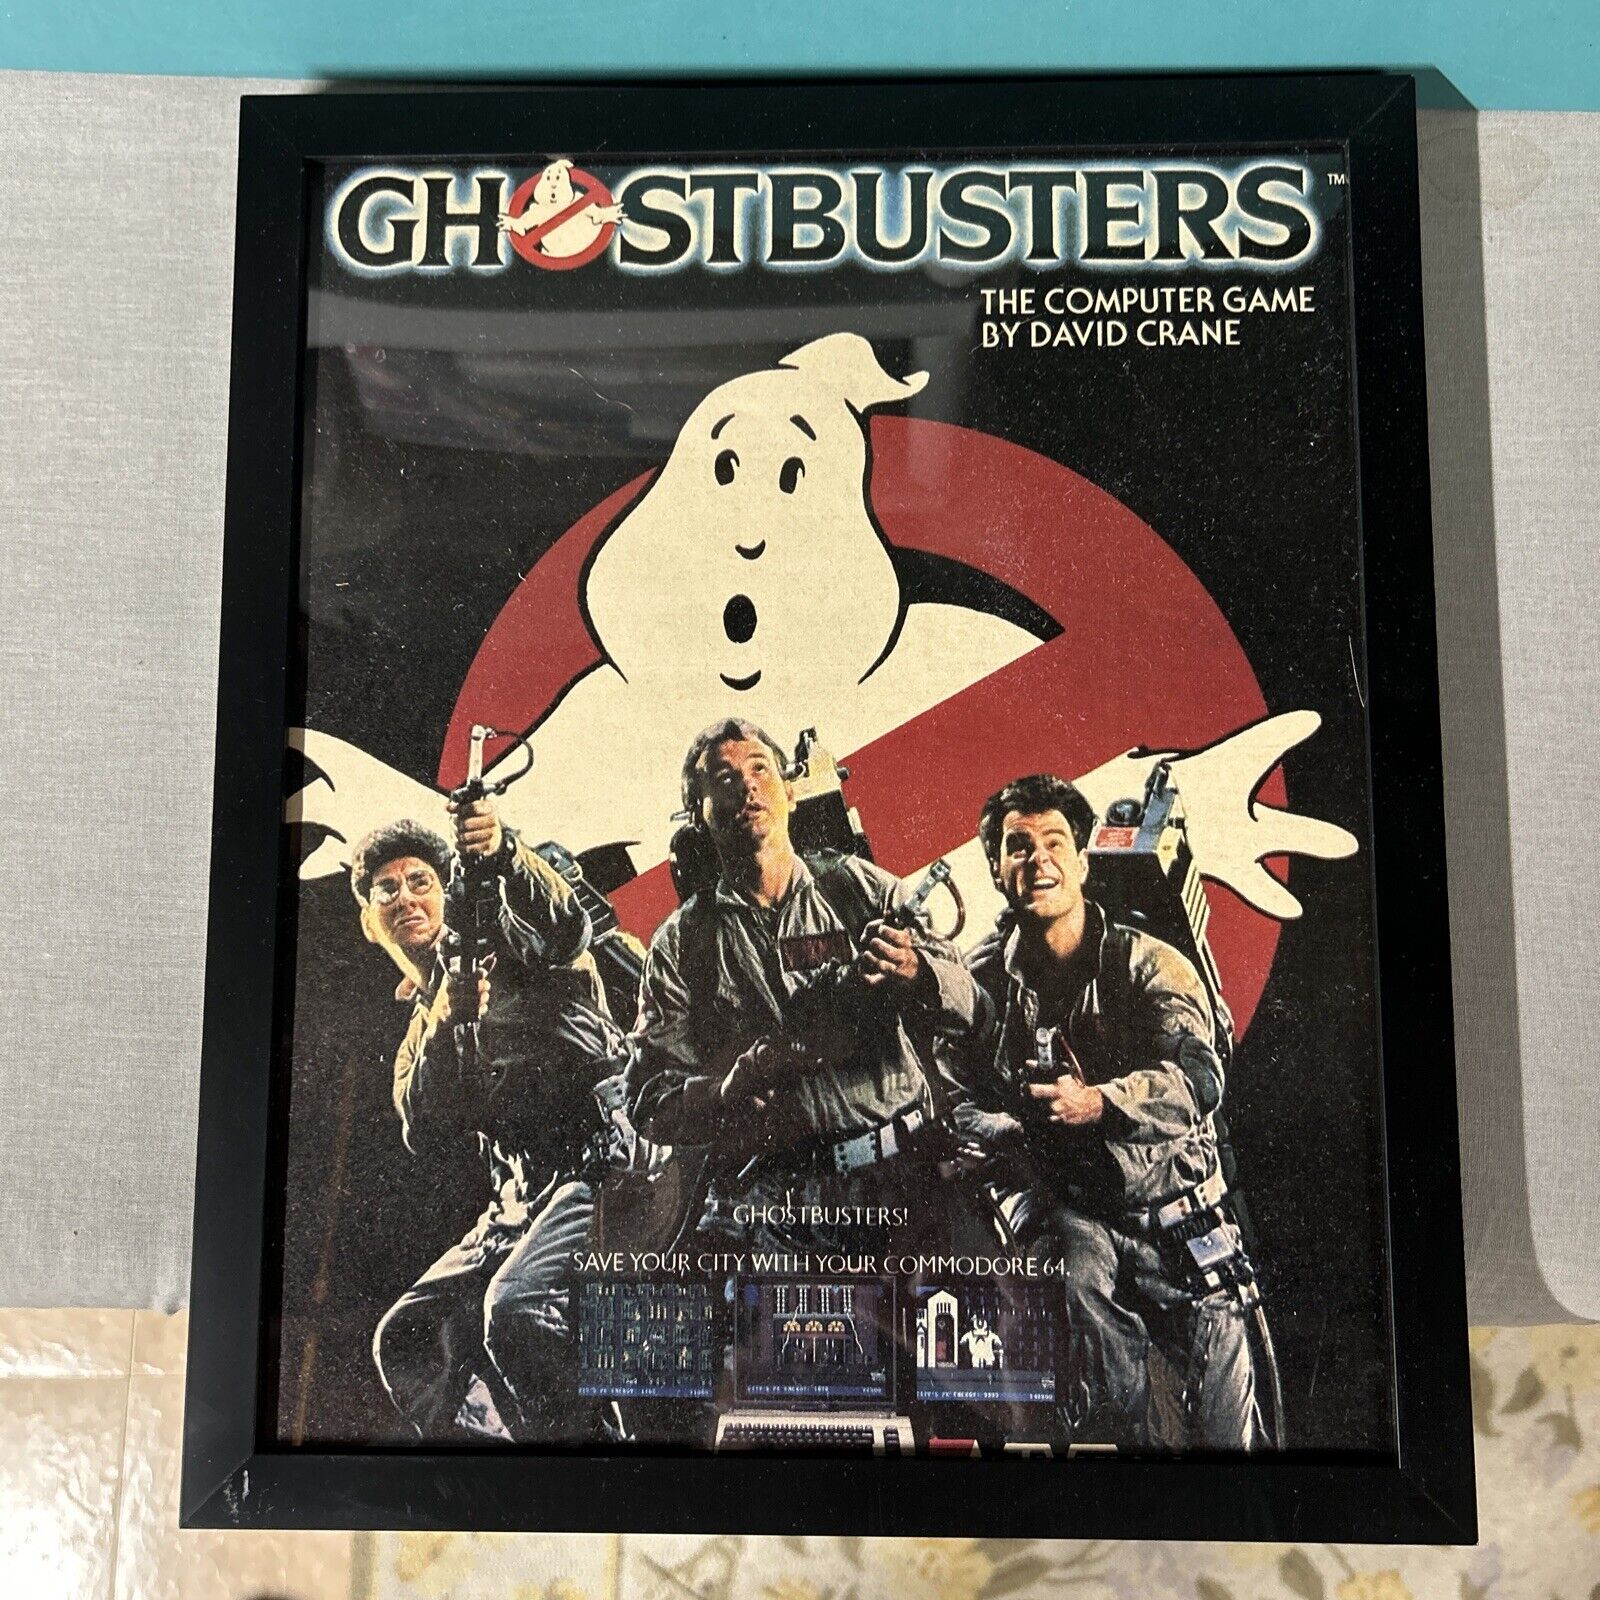 FRAMED 1984 GHOSTBUSTERS COMMODORE 64 ACTIVISION GAME PROMO AD Approx 11”x13”